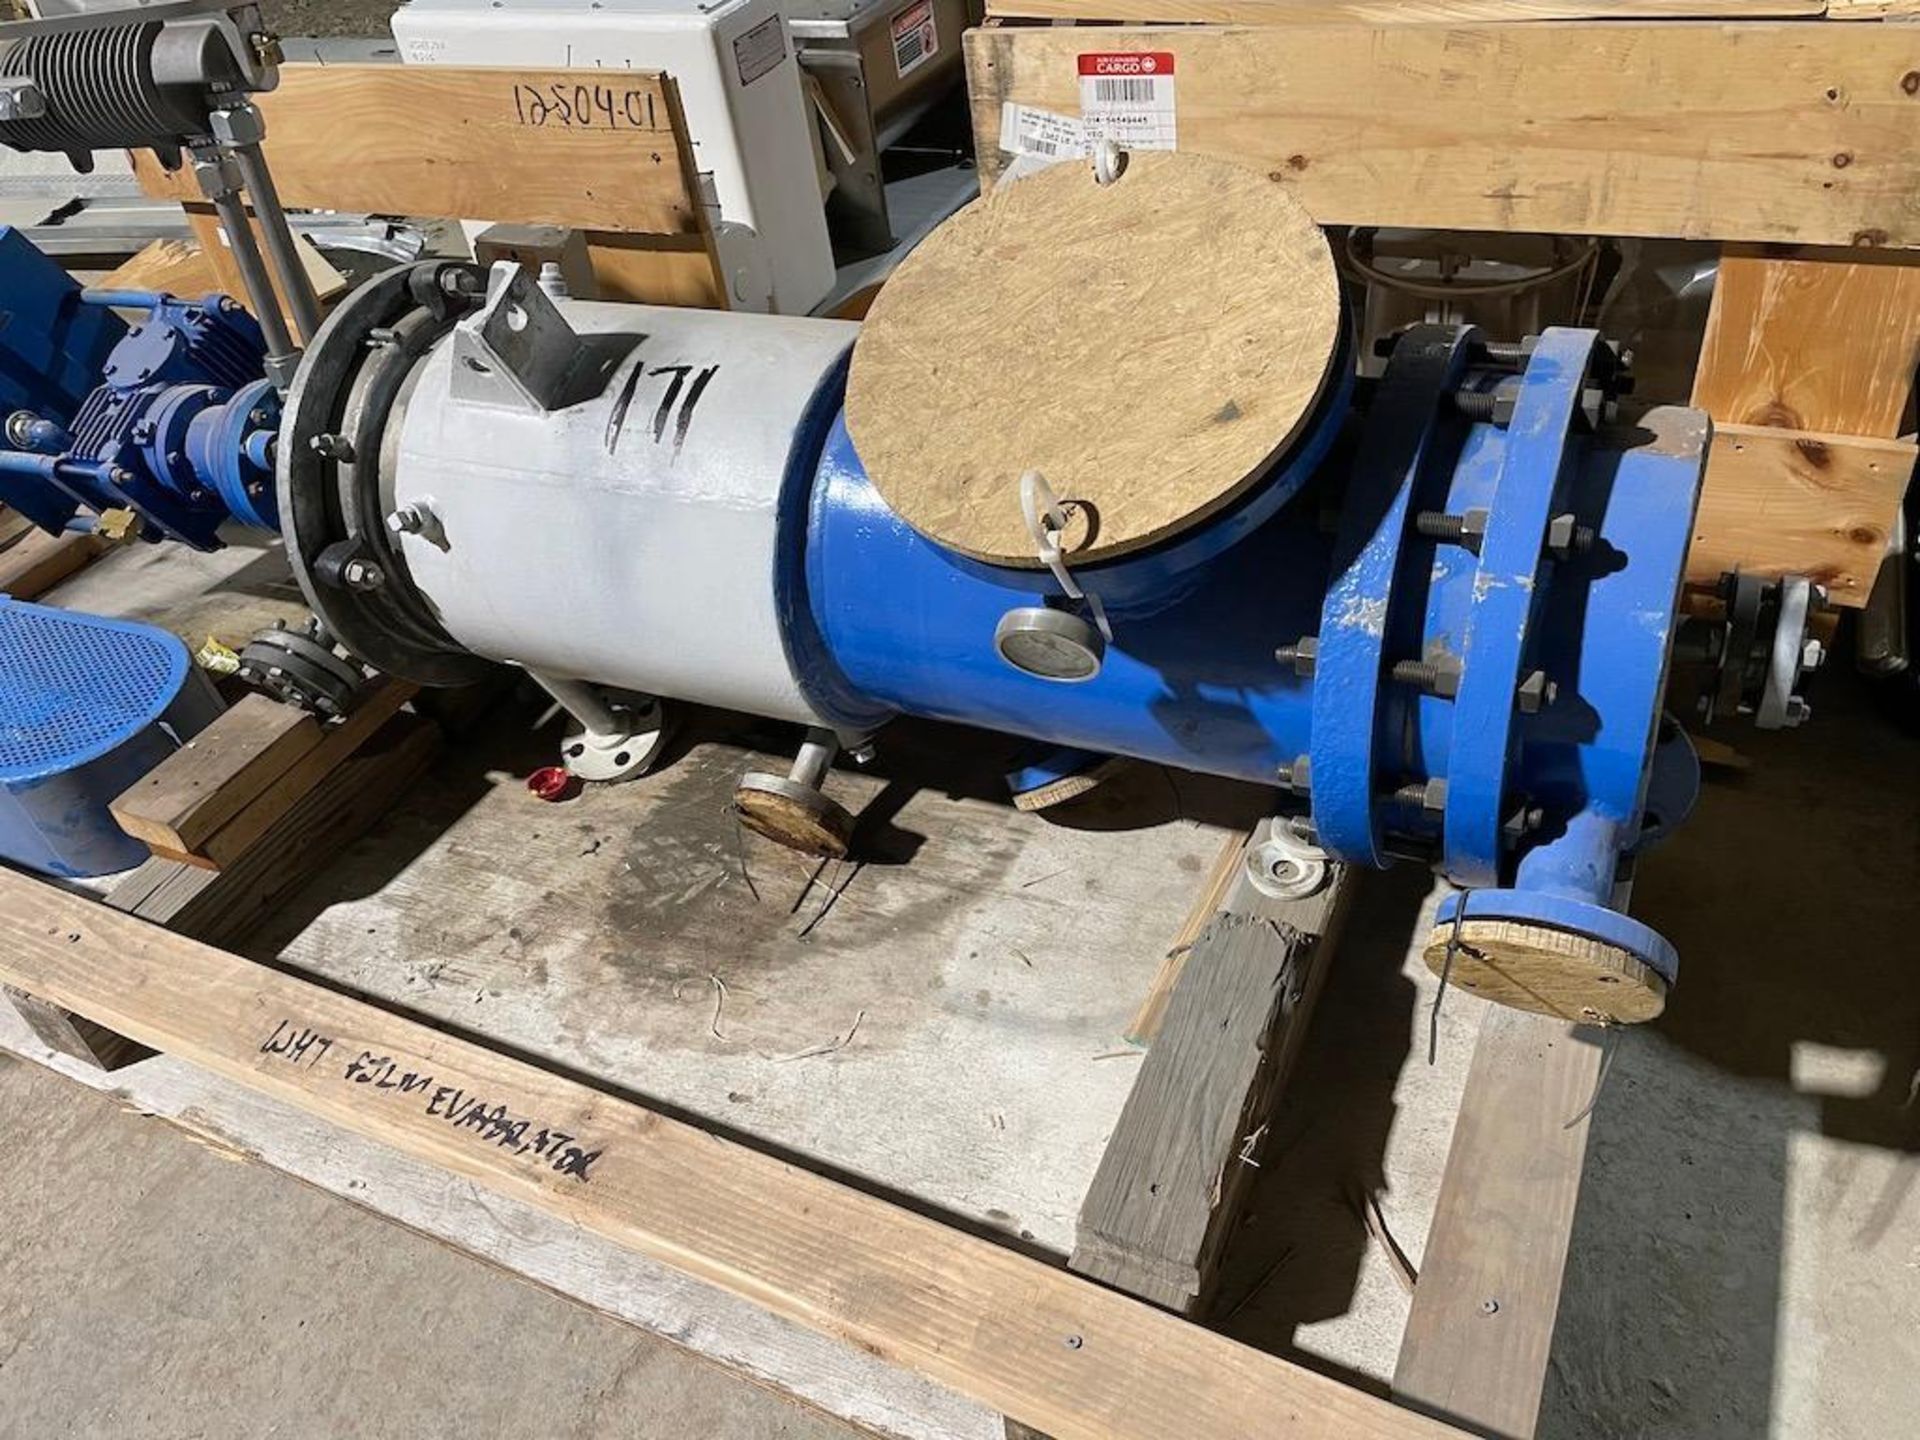 SMALL WIPED FILM EVAPORATOR, REFURBISHED BY PFAUDLER IN APPROX 2019, INCLUDES: PFAUDLER PUMP, SKID 2 - Image 2 of 17